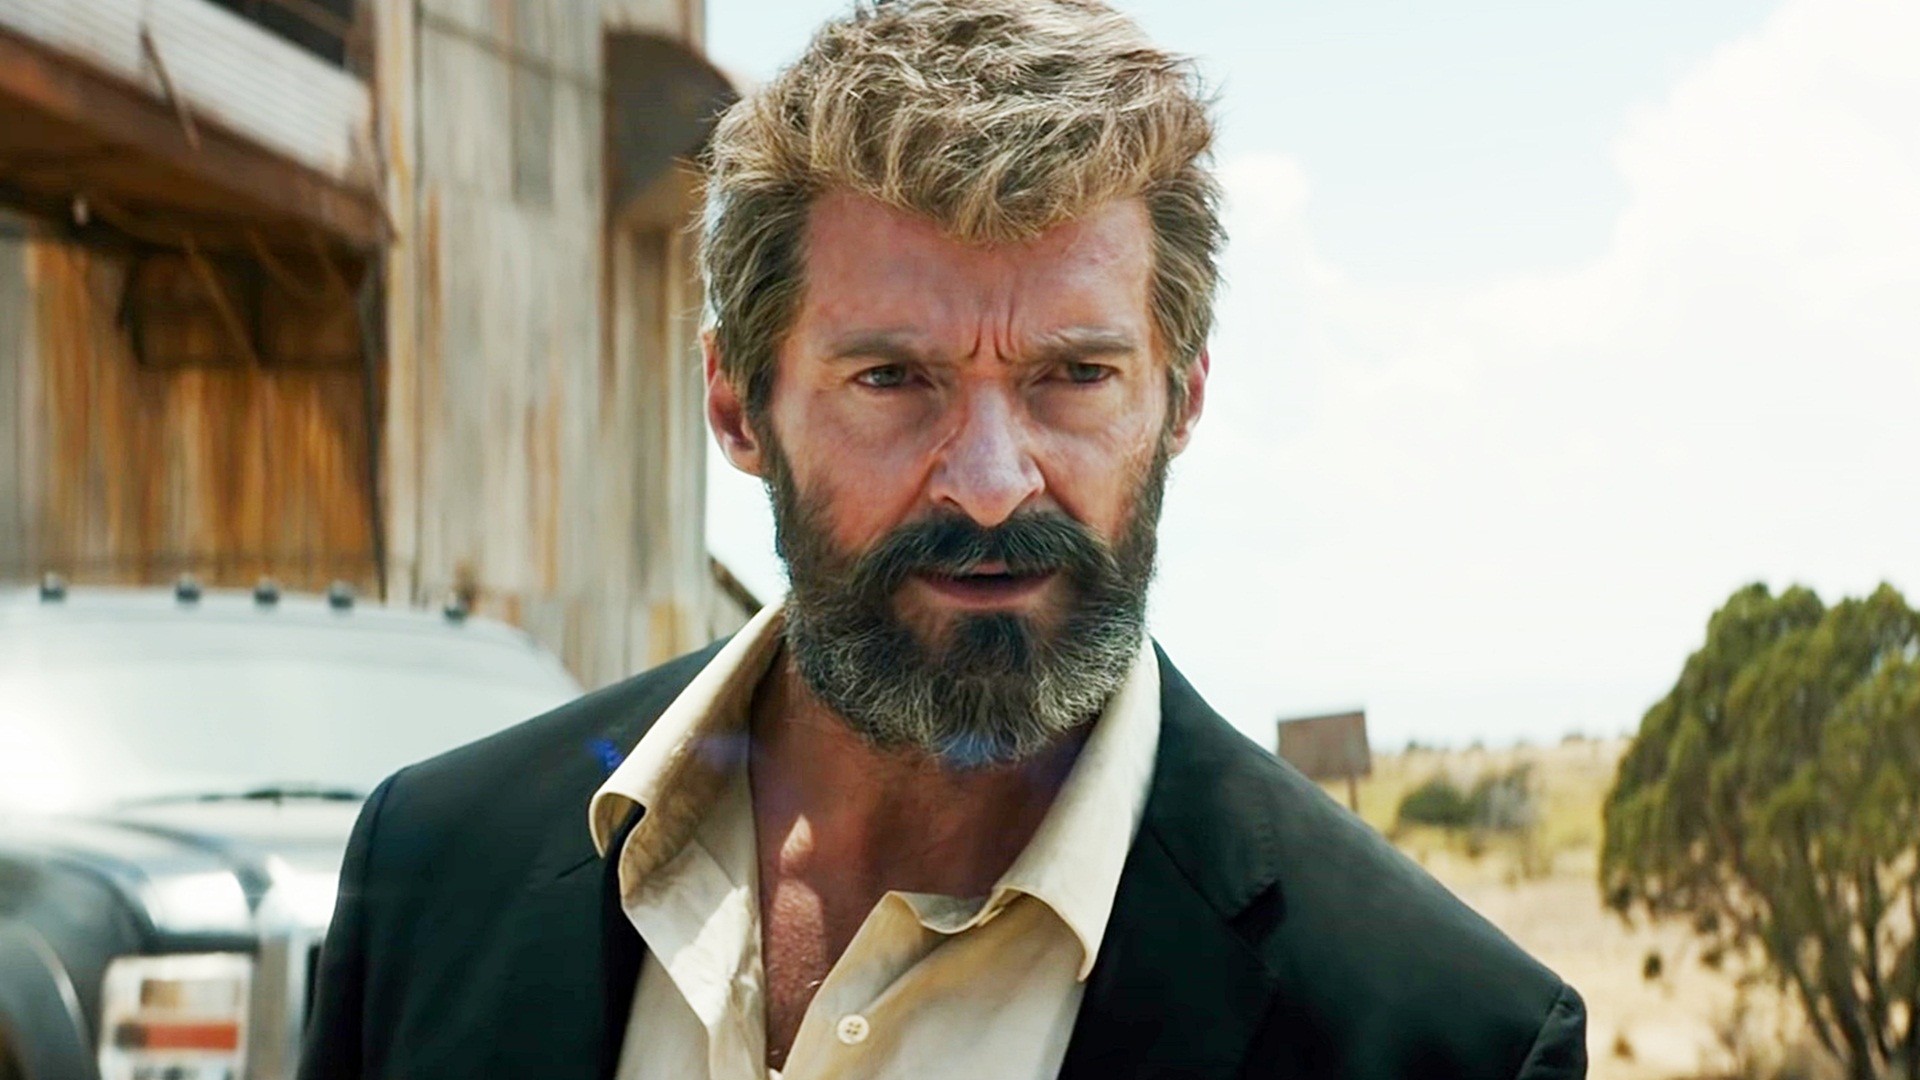 1920x1080 10 Reasons Why “Logan” is the Best Superhero Movie Since “The Dark Knight”